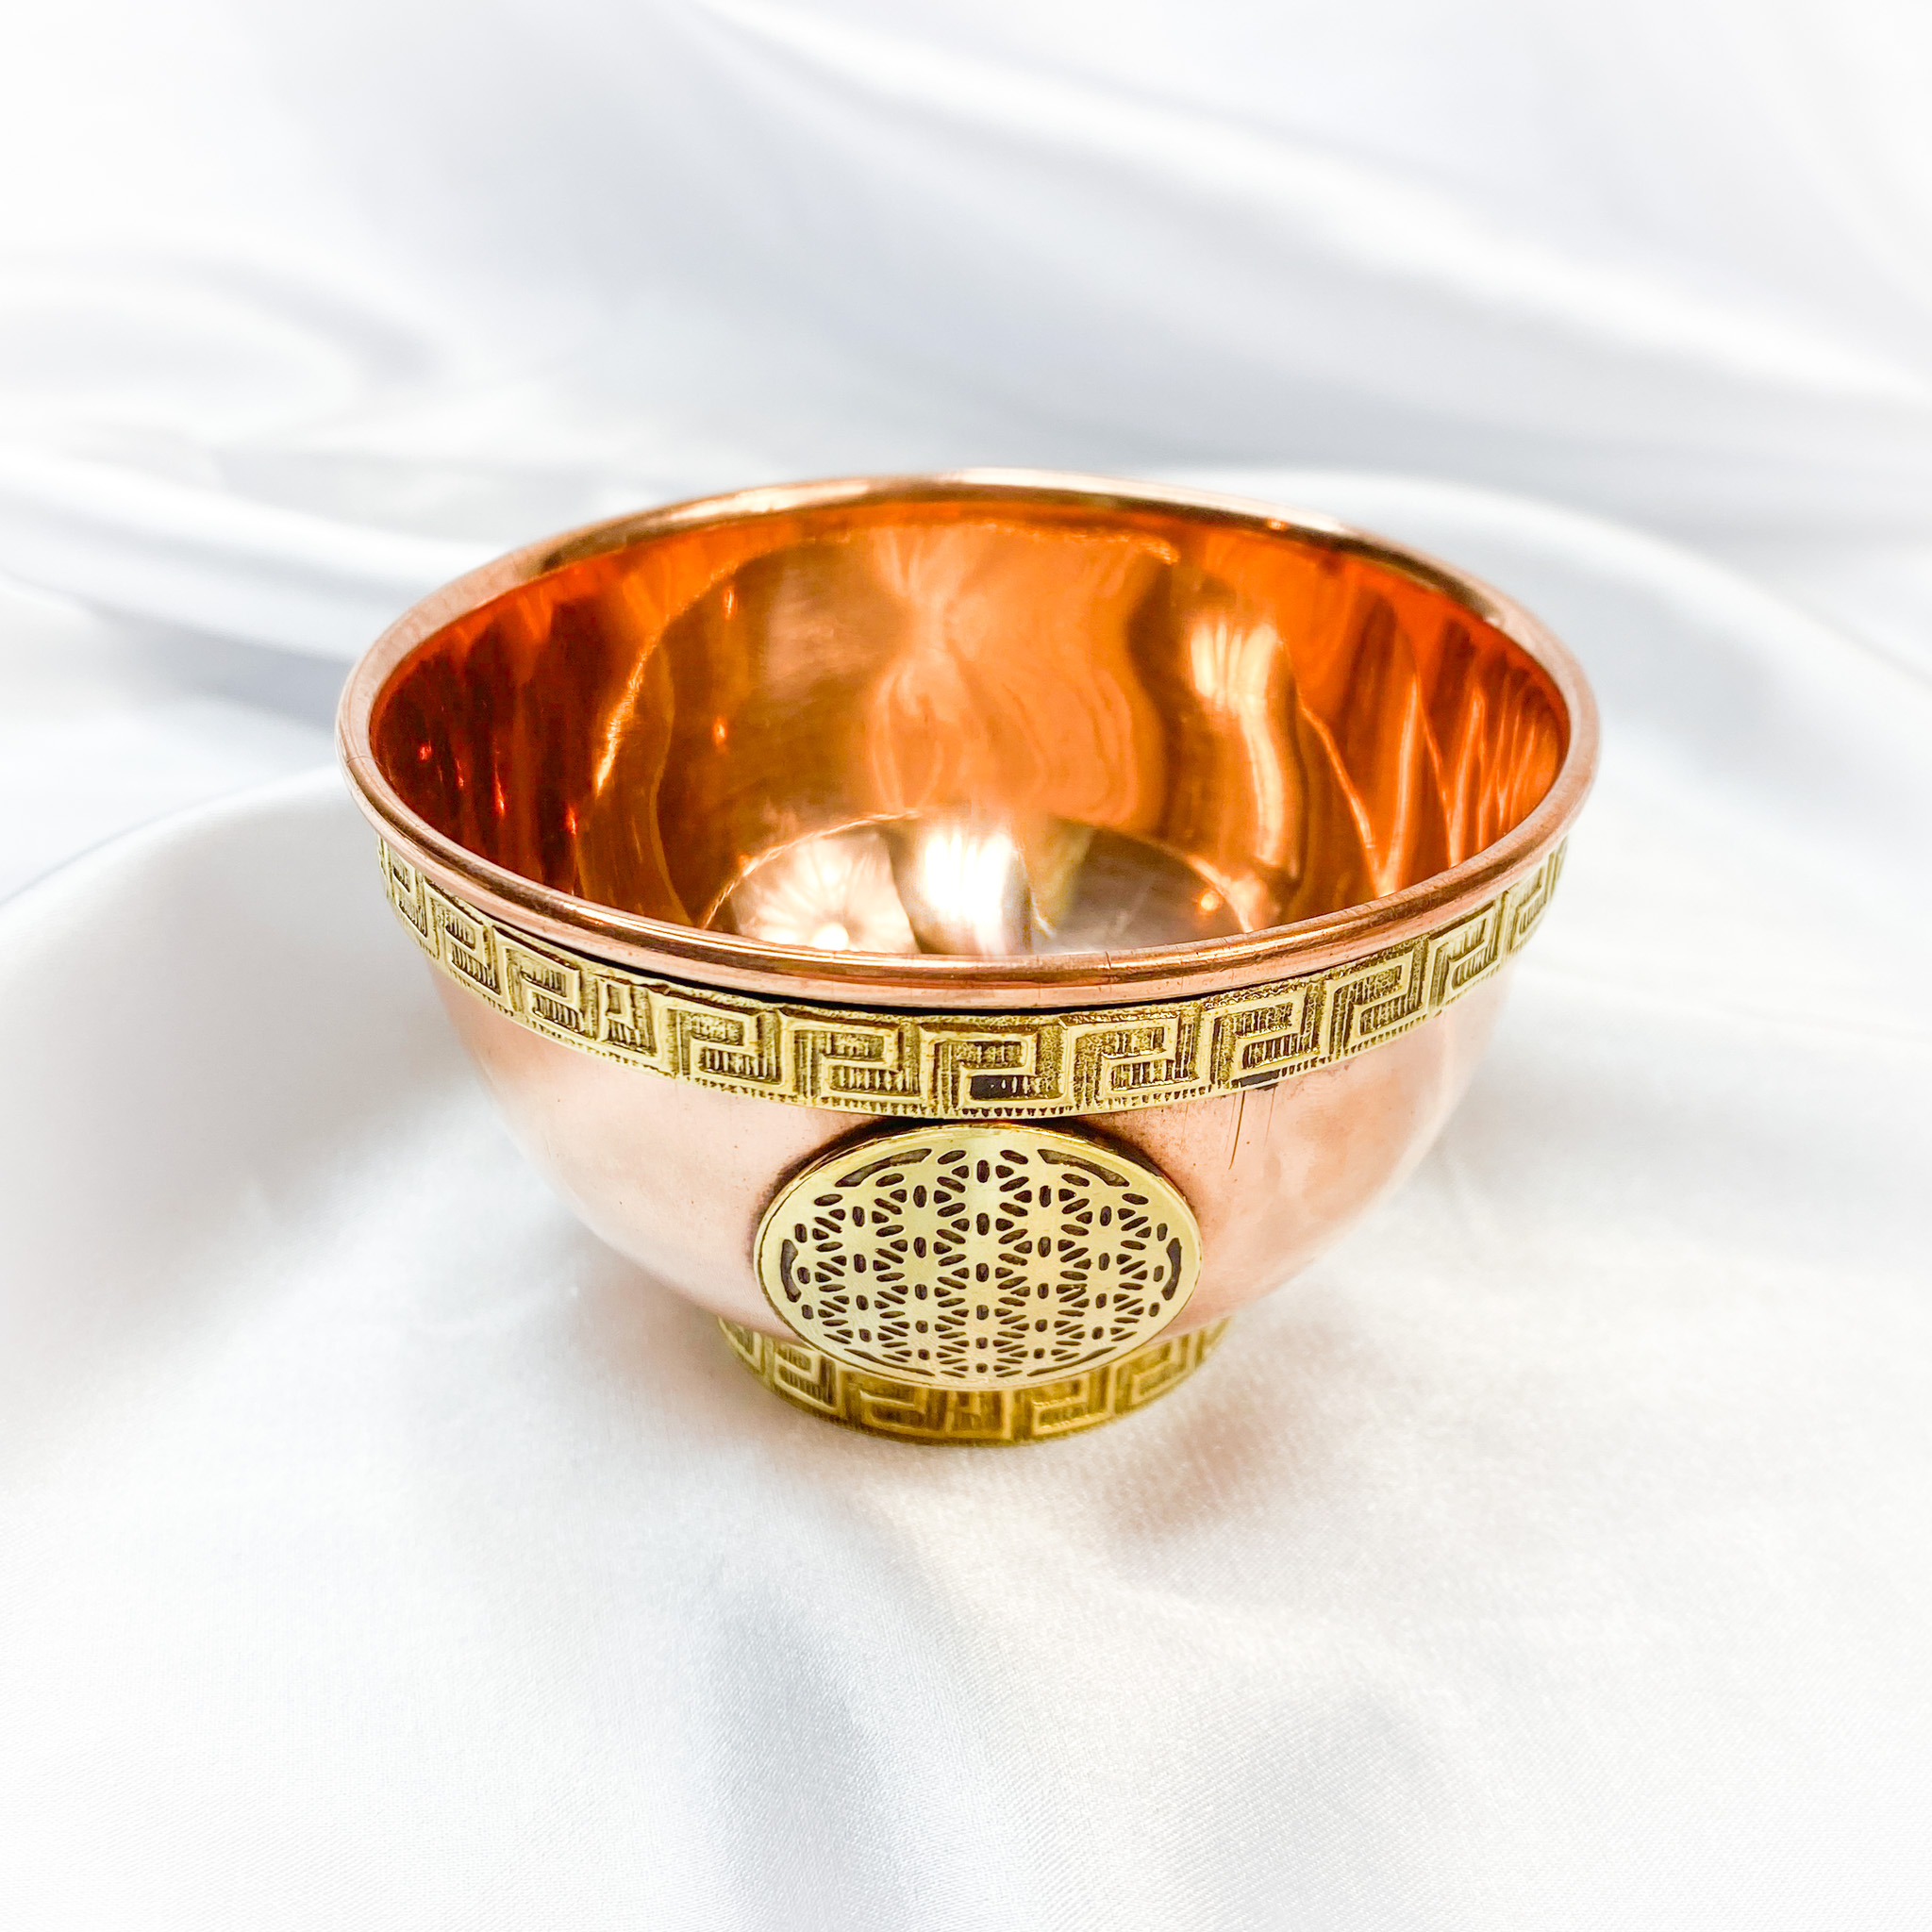 Copper Bowl Offering Flower of Life